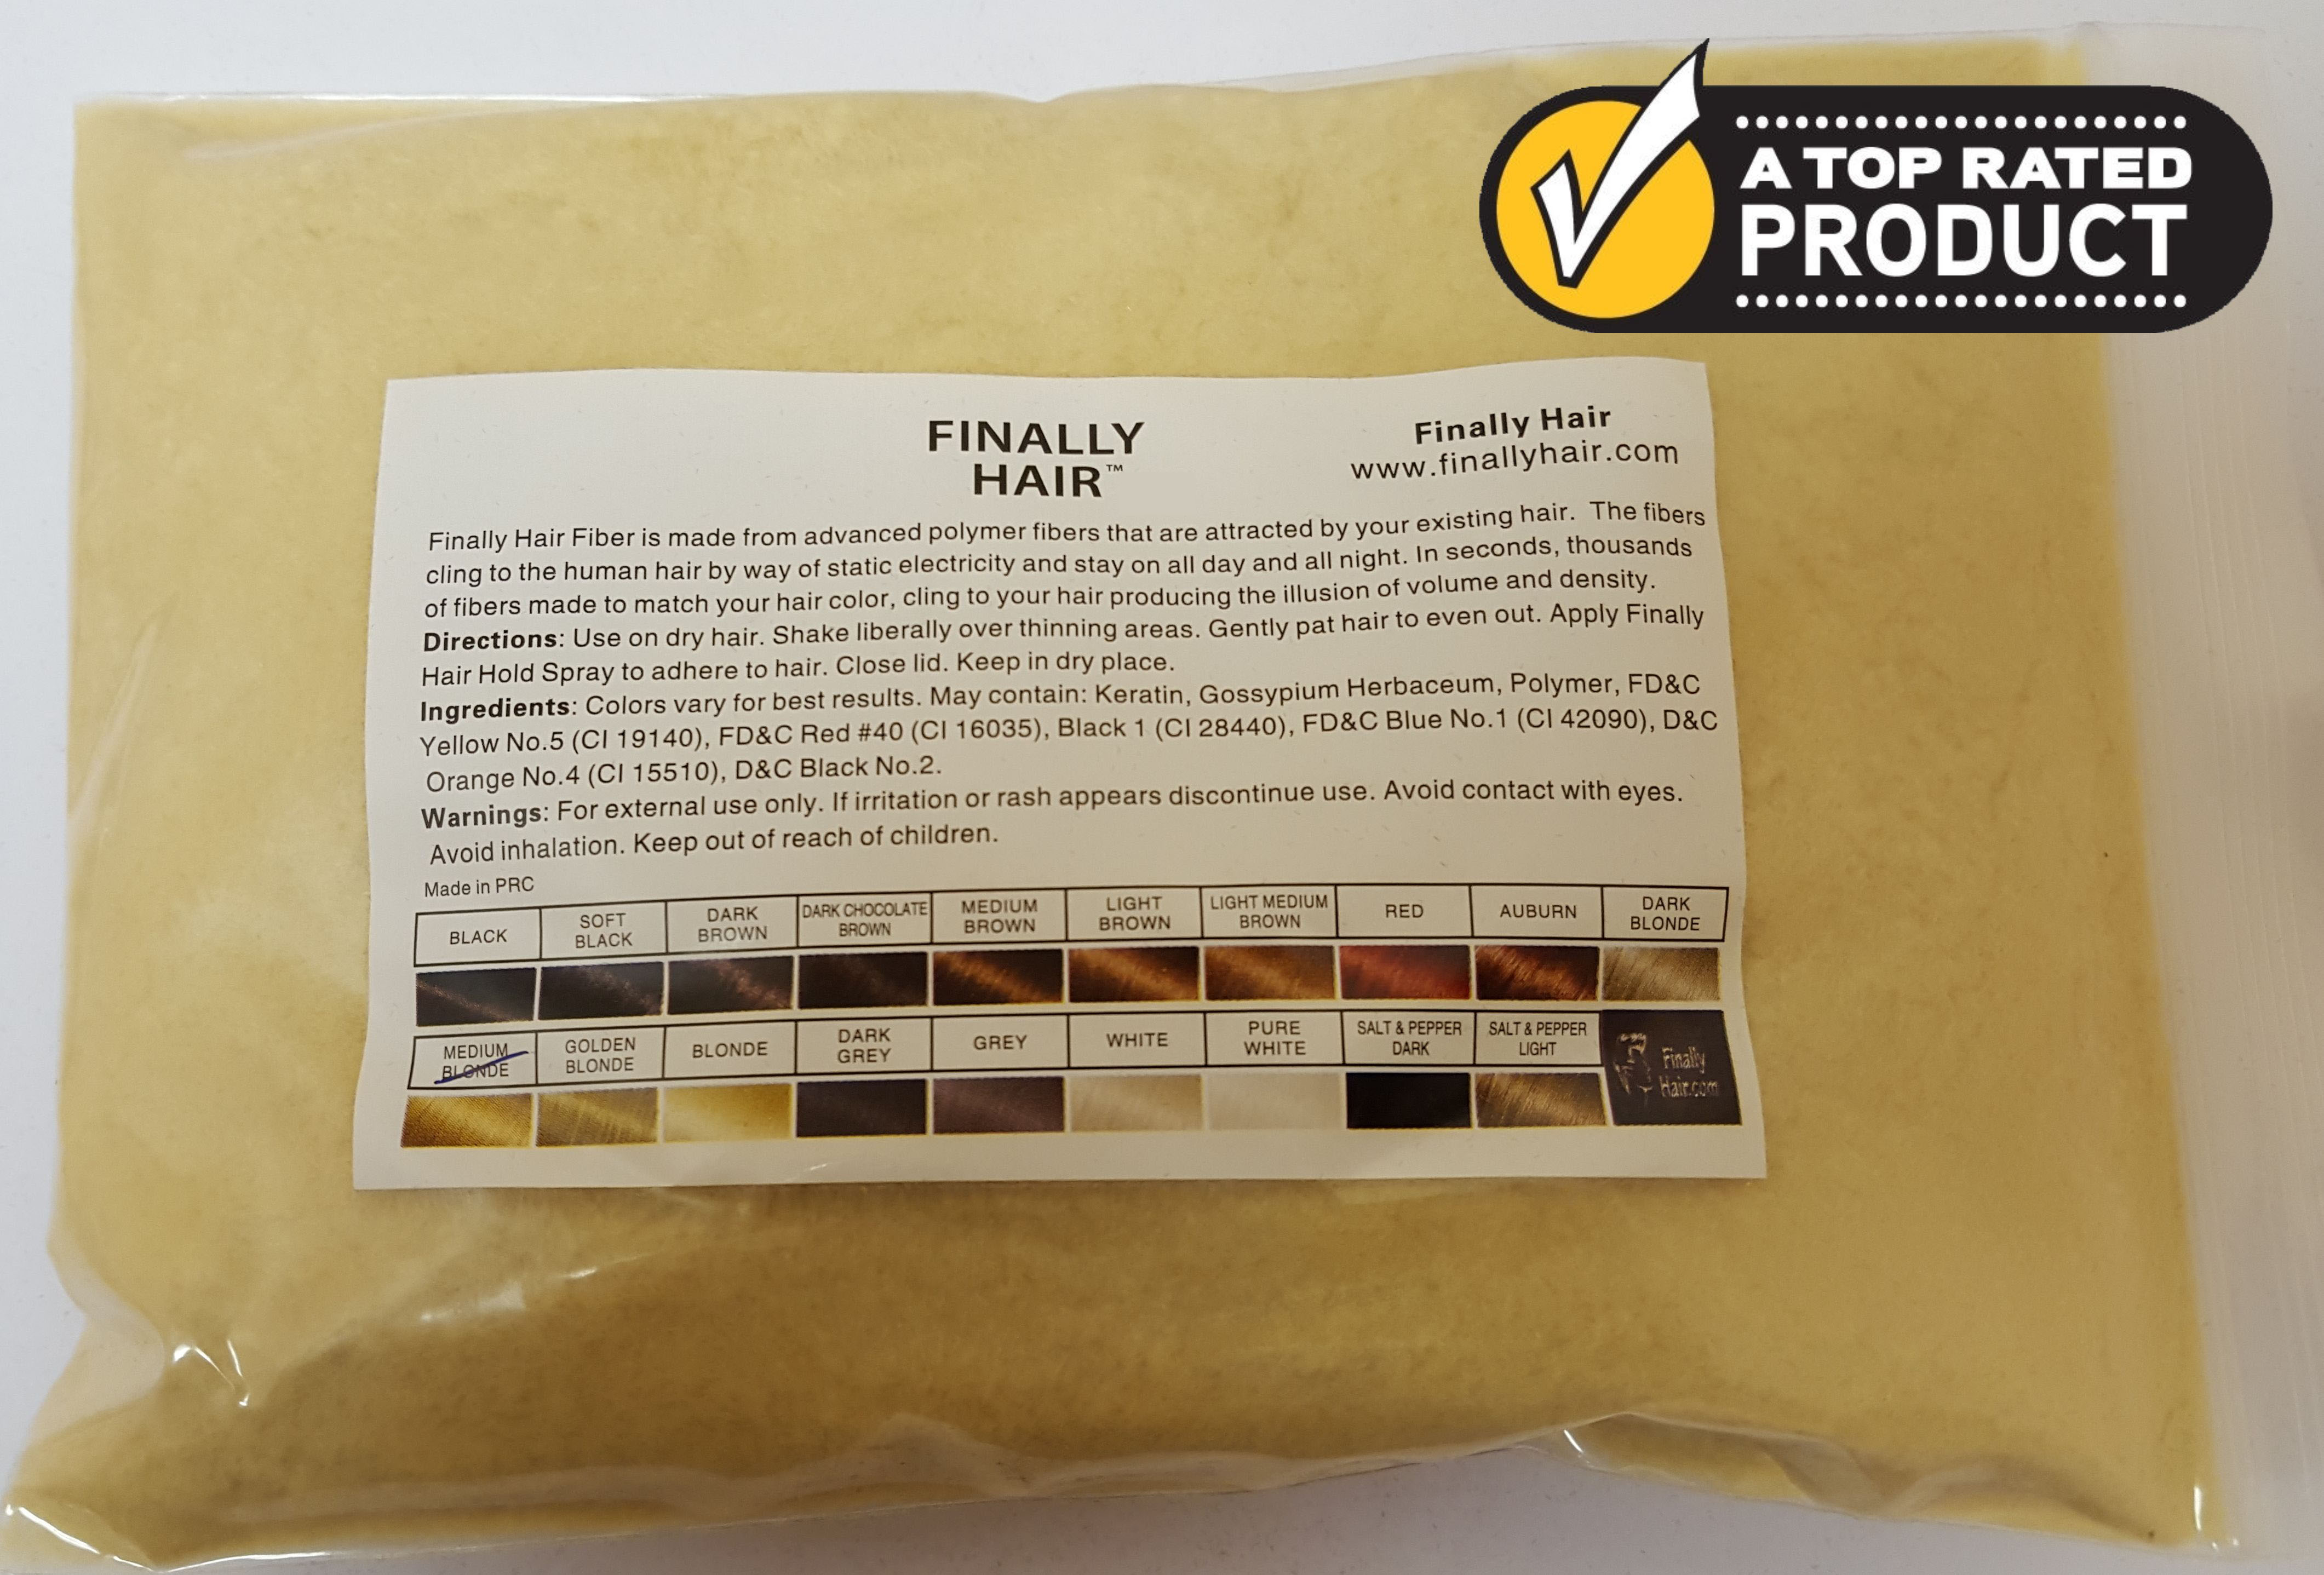 Refill Bag - Finally Hair Building Fibers - 25 Gram Hair Thickener Filler Fibers in Light Medium Blonde (we have 20 colors and several blond shades) Conceal Cover Hair Loss - image 1 of 7